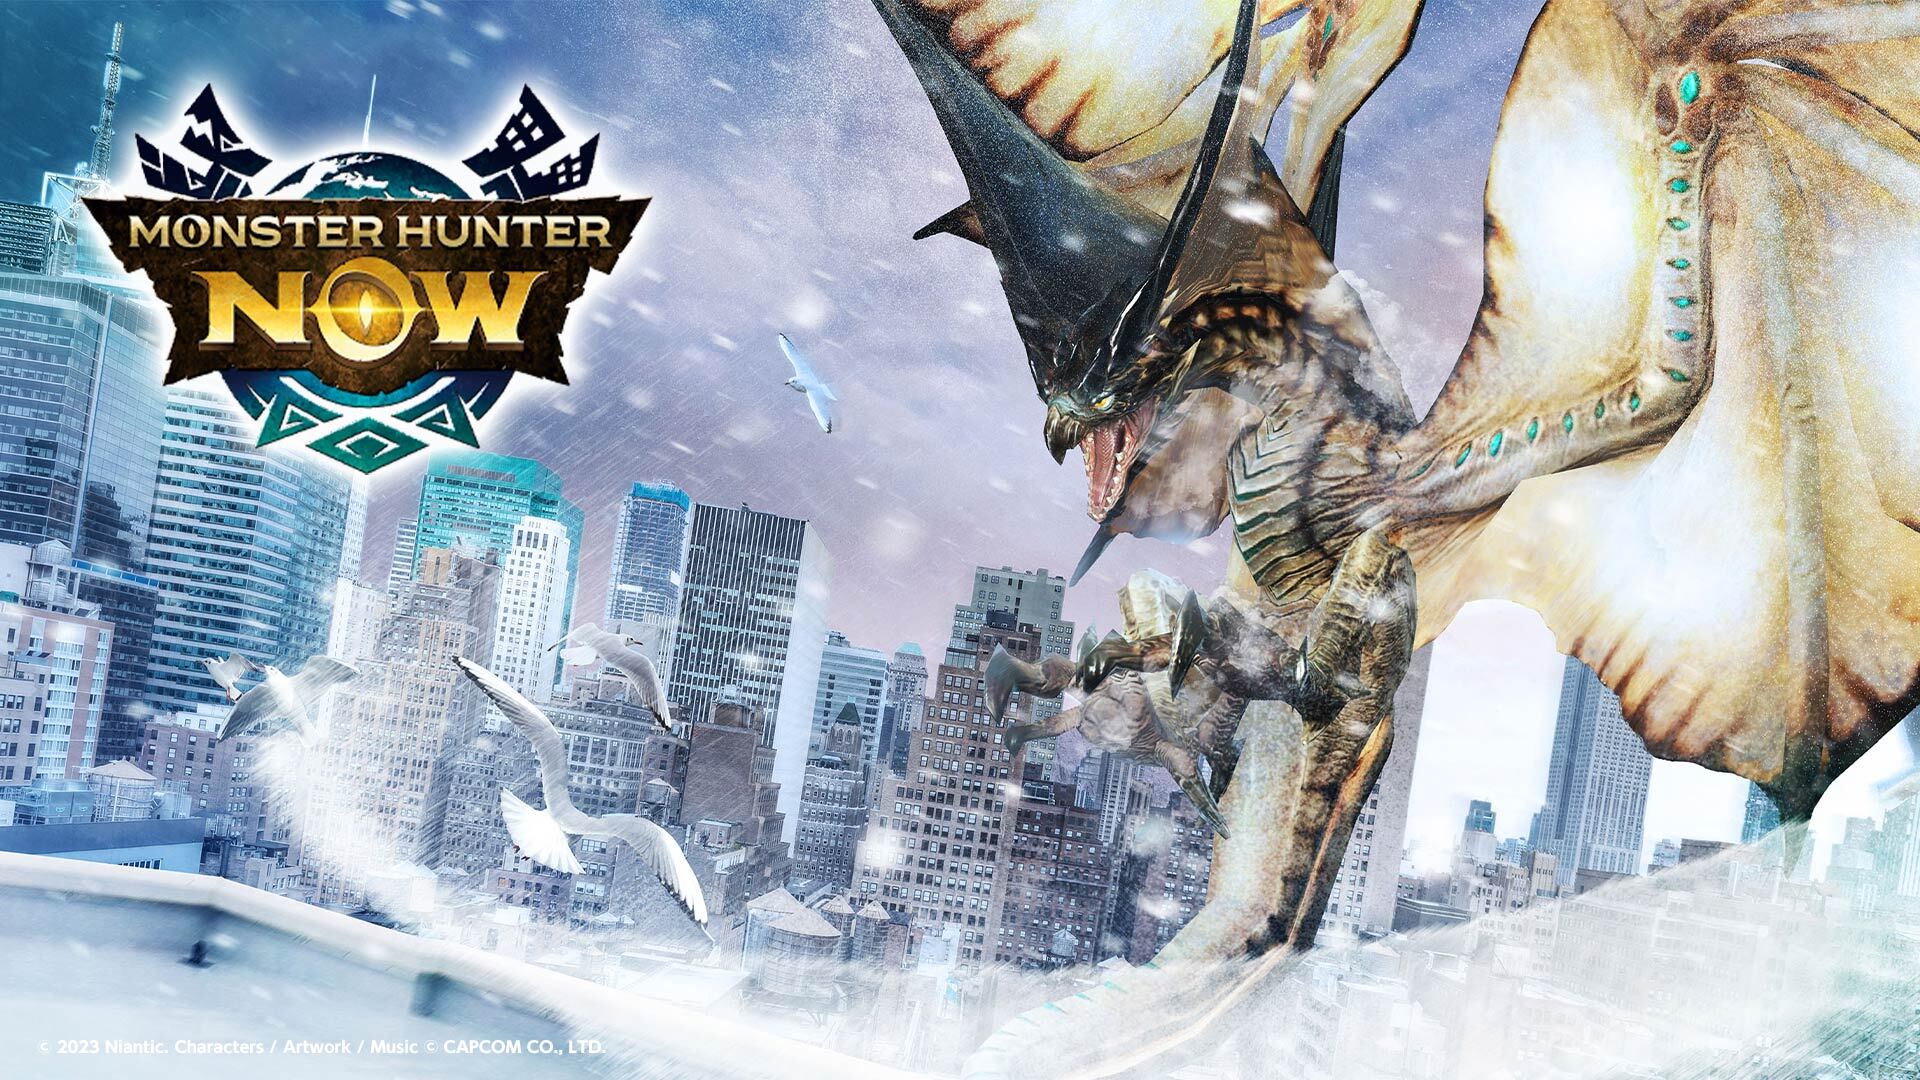 New ‘Monster Hunter Now’ Version 65.0 Update Out Now Adds Weapon Sorting and Filtering, Great Sword Damage Adjustments, and More